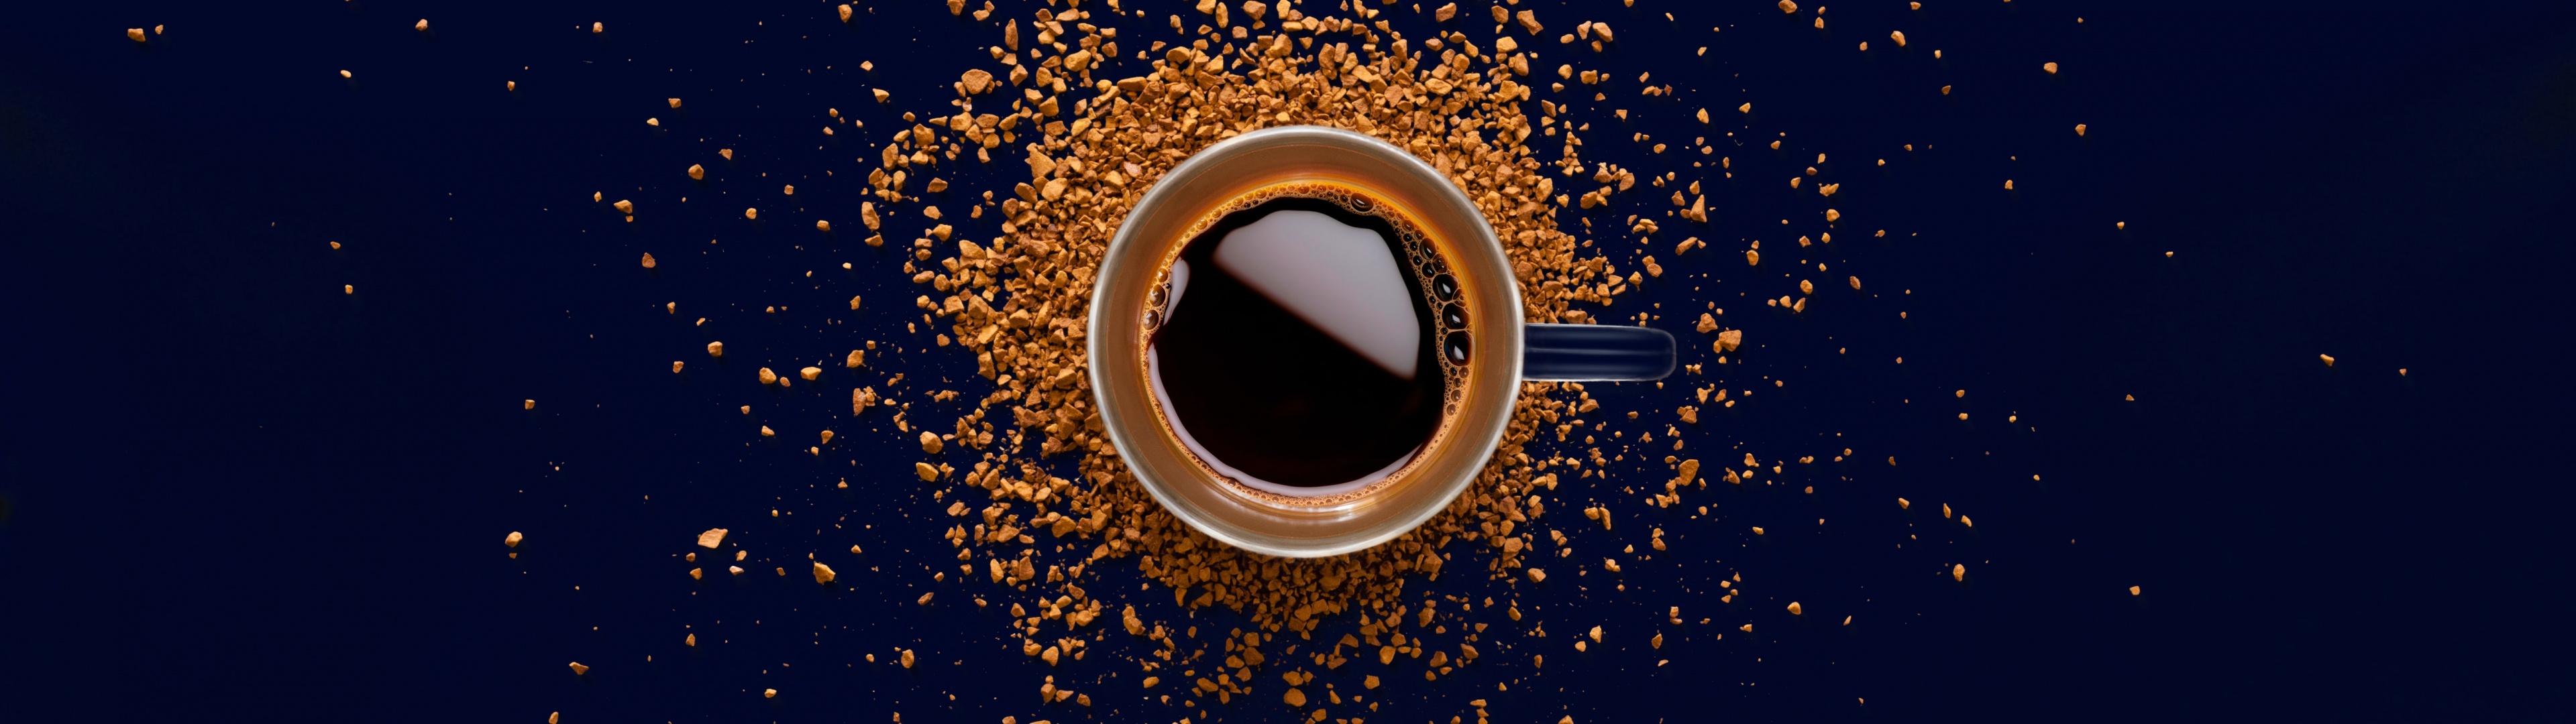 Coffee cup Wallpaper 4K, Instant Coffee, Food, #3327